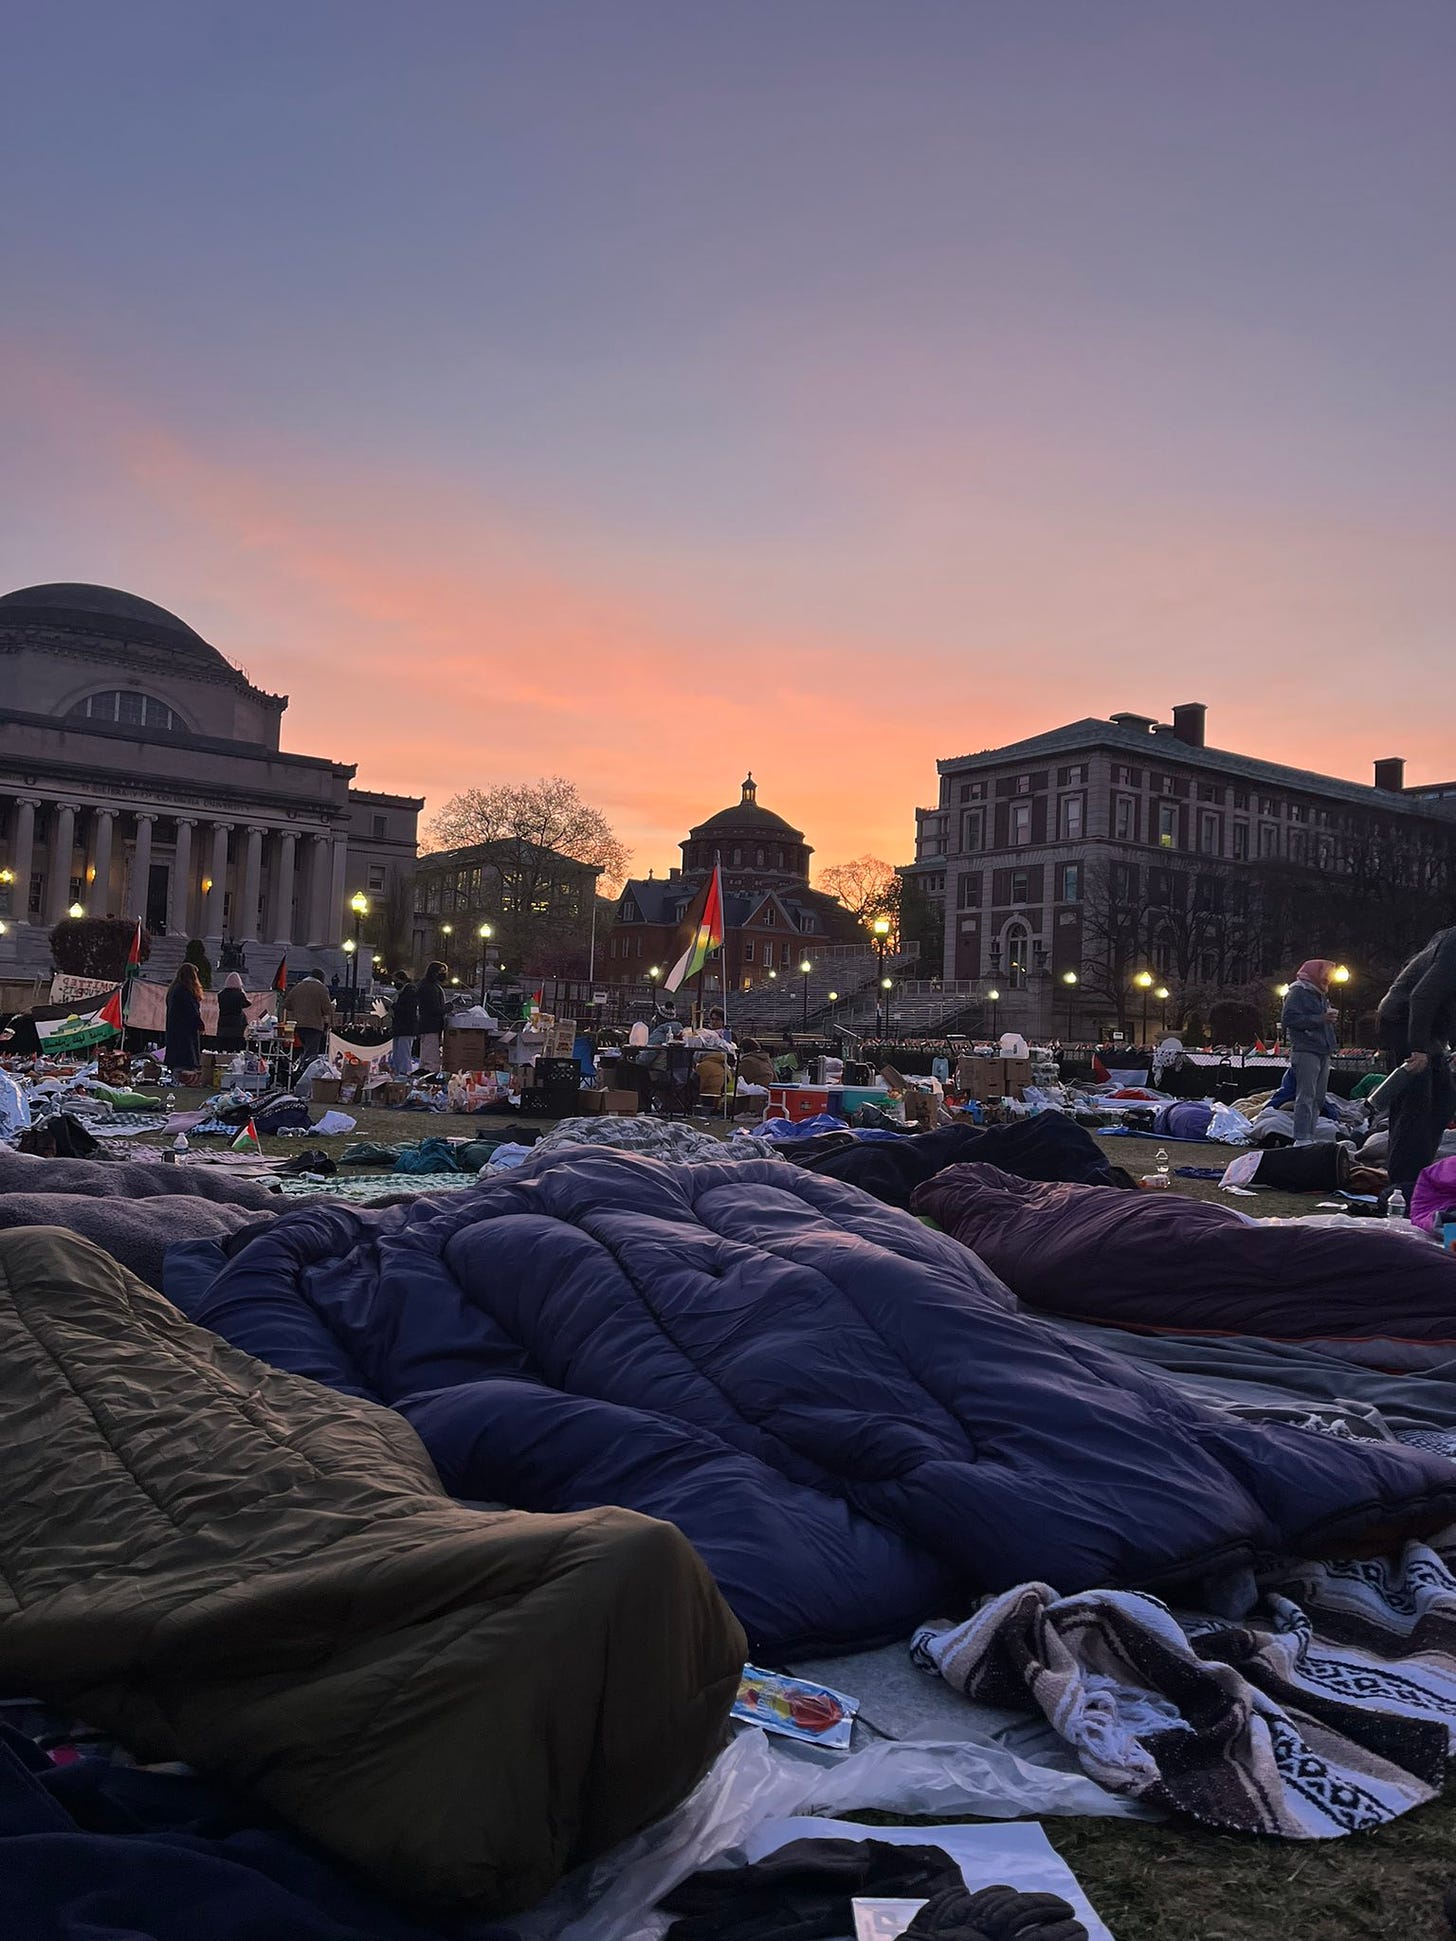 The sun rises over Columbia University. The campus streetlights are still on while students slowly rise out of sleeping bags across the lawn. The Palestinian flag can be seen in several places across frame. Stations, coolers, and supplies are in the background. This photograph has been taken from a tweet (linked in the photo and in the caption)